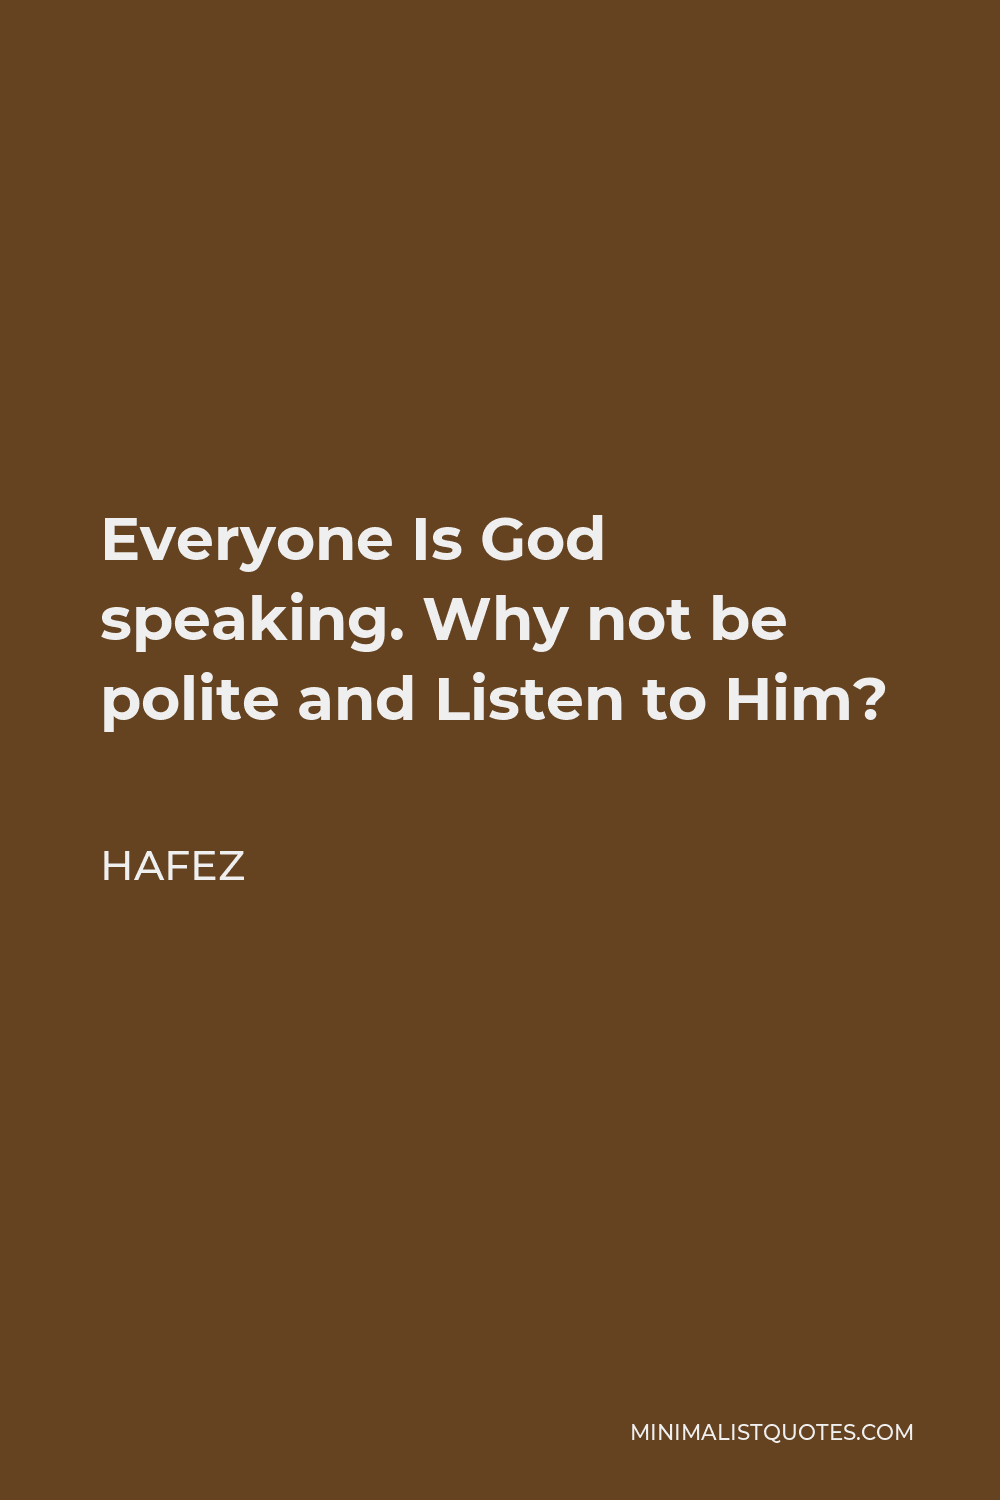 Hafez Quote - Everyone Is God speaking. Why not be polite and Listen to Him?